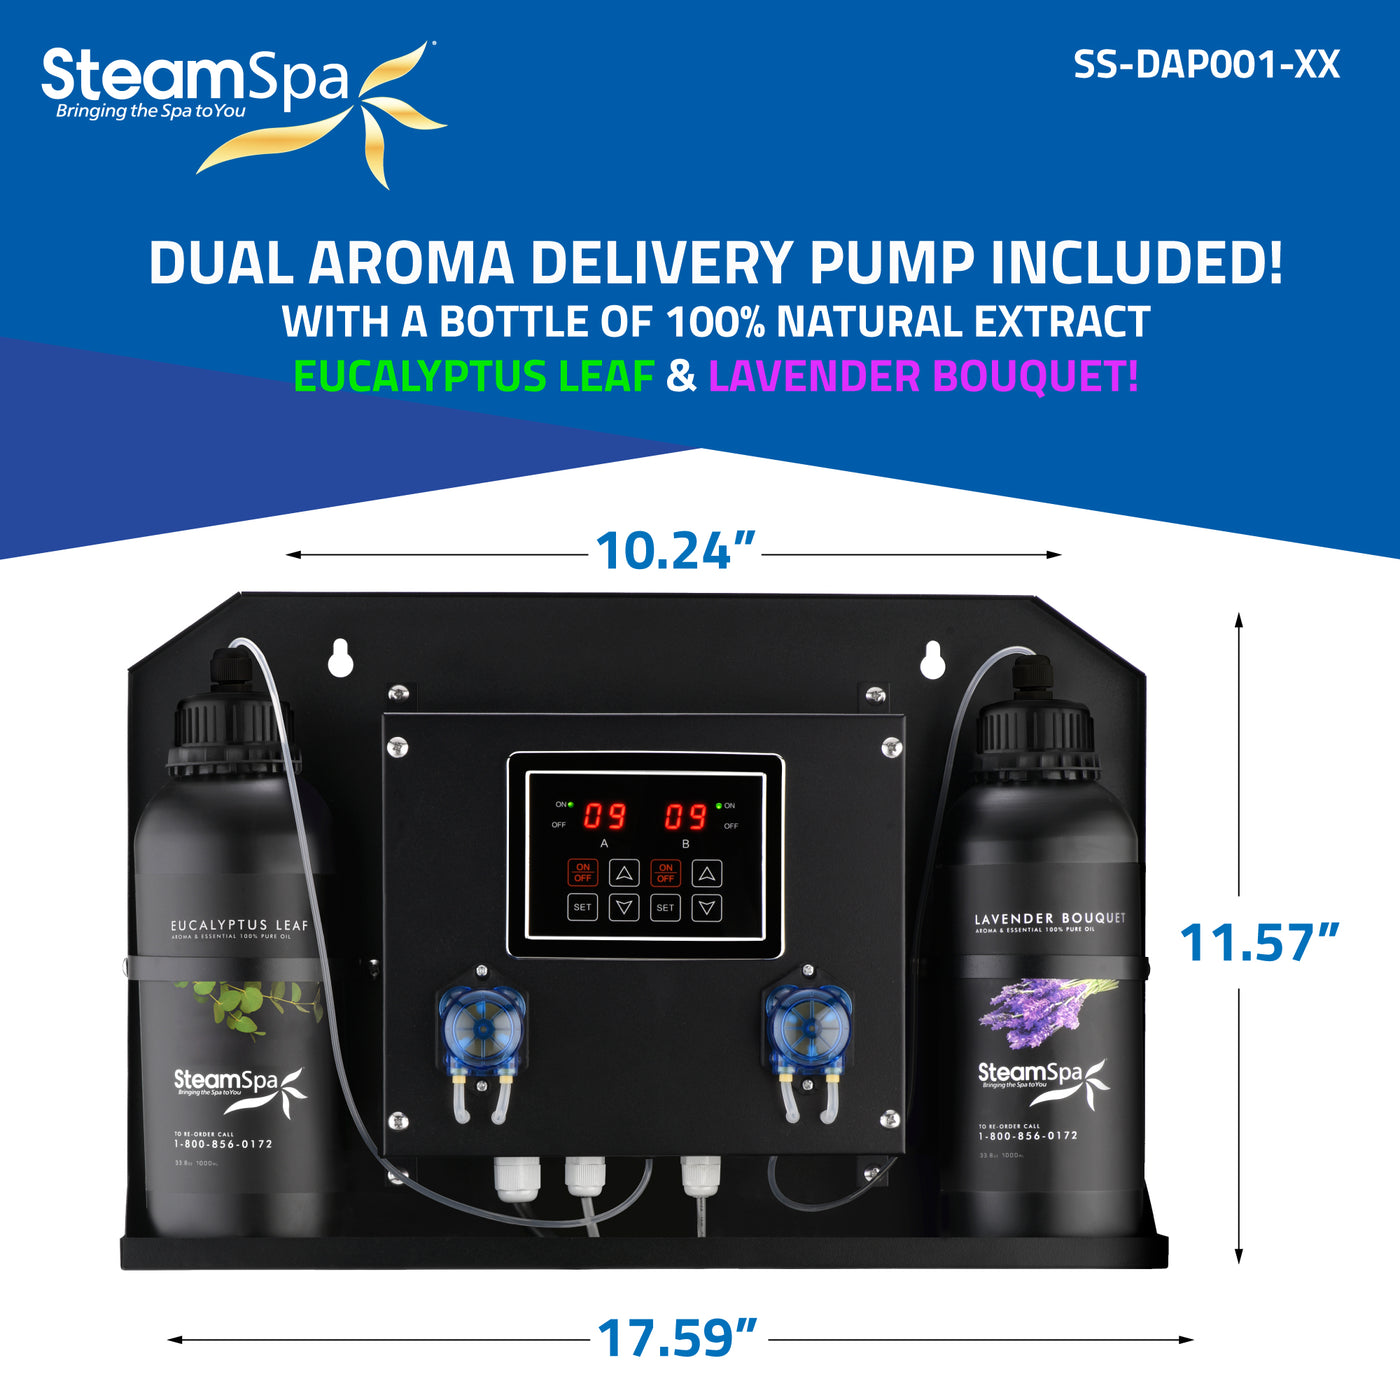 Black Series WiFi and Bluetooth 2 x 7.5kW QuickStart Steam Bath Generator Package with Dual Aroma Pump in Brushed Nickel BKT1500BN-ADP